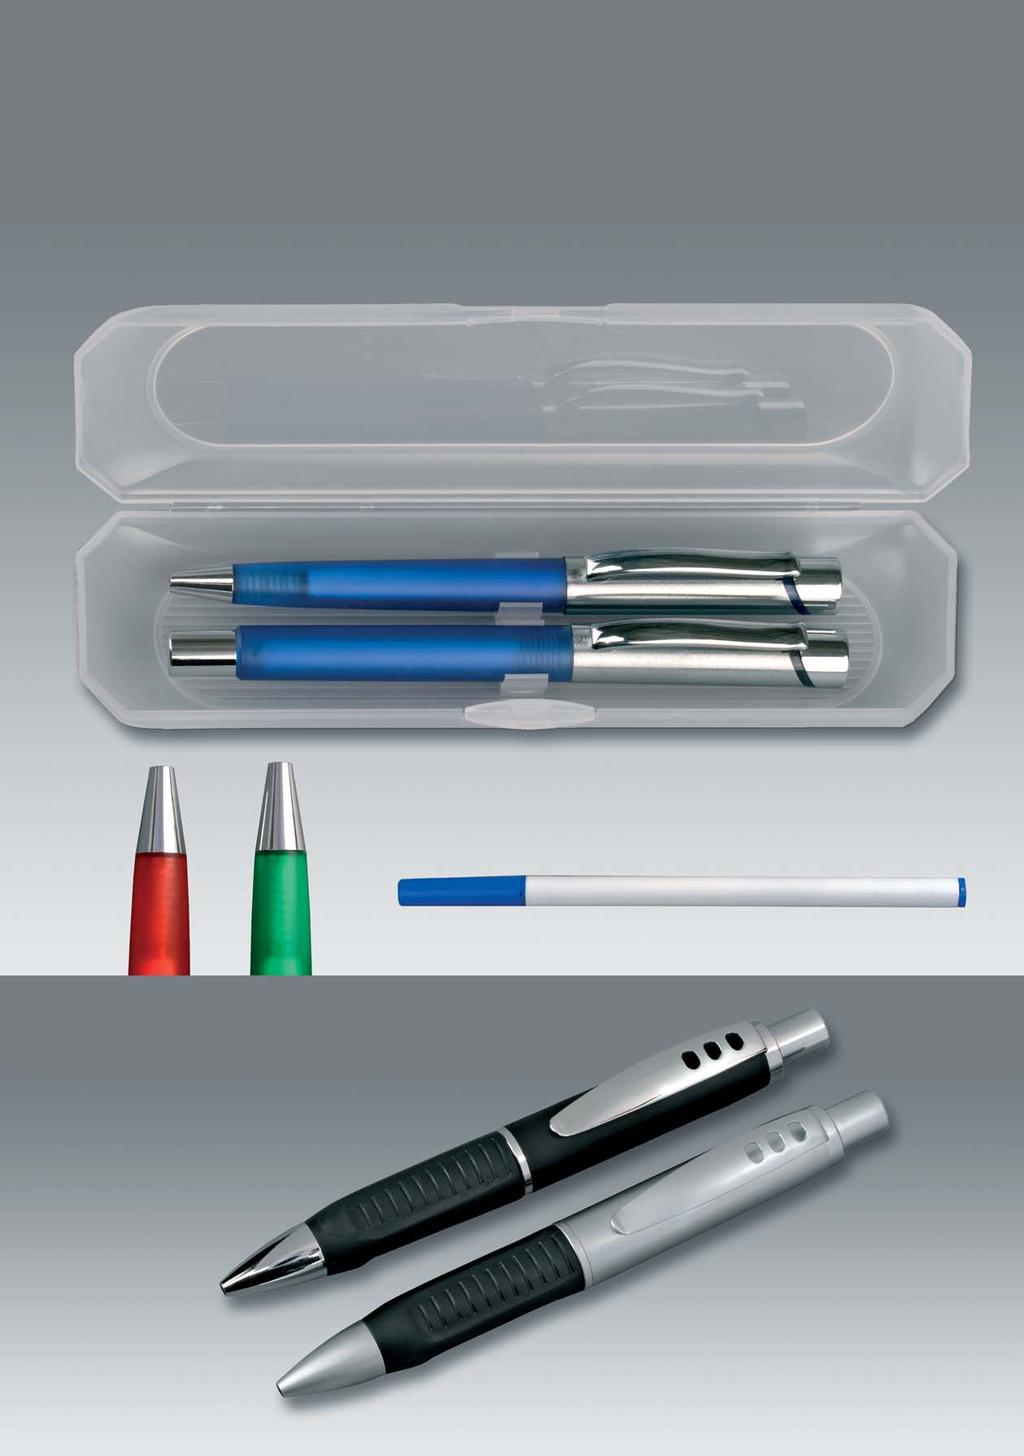 New Article 355G8: Set CALYPSO, ball pen with int. plastic refill (white tube), blue ink. and rollerball with german quality ink. (white tube) blue ink. incl.